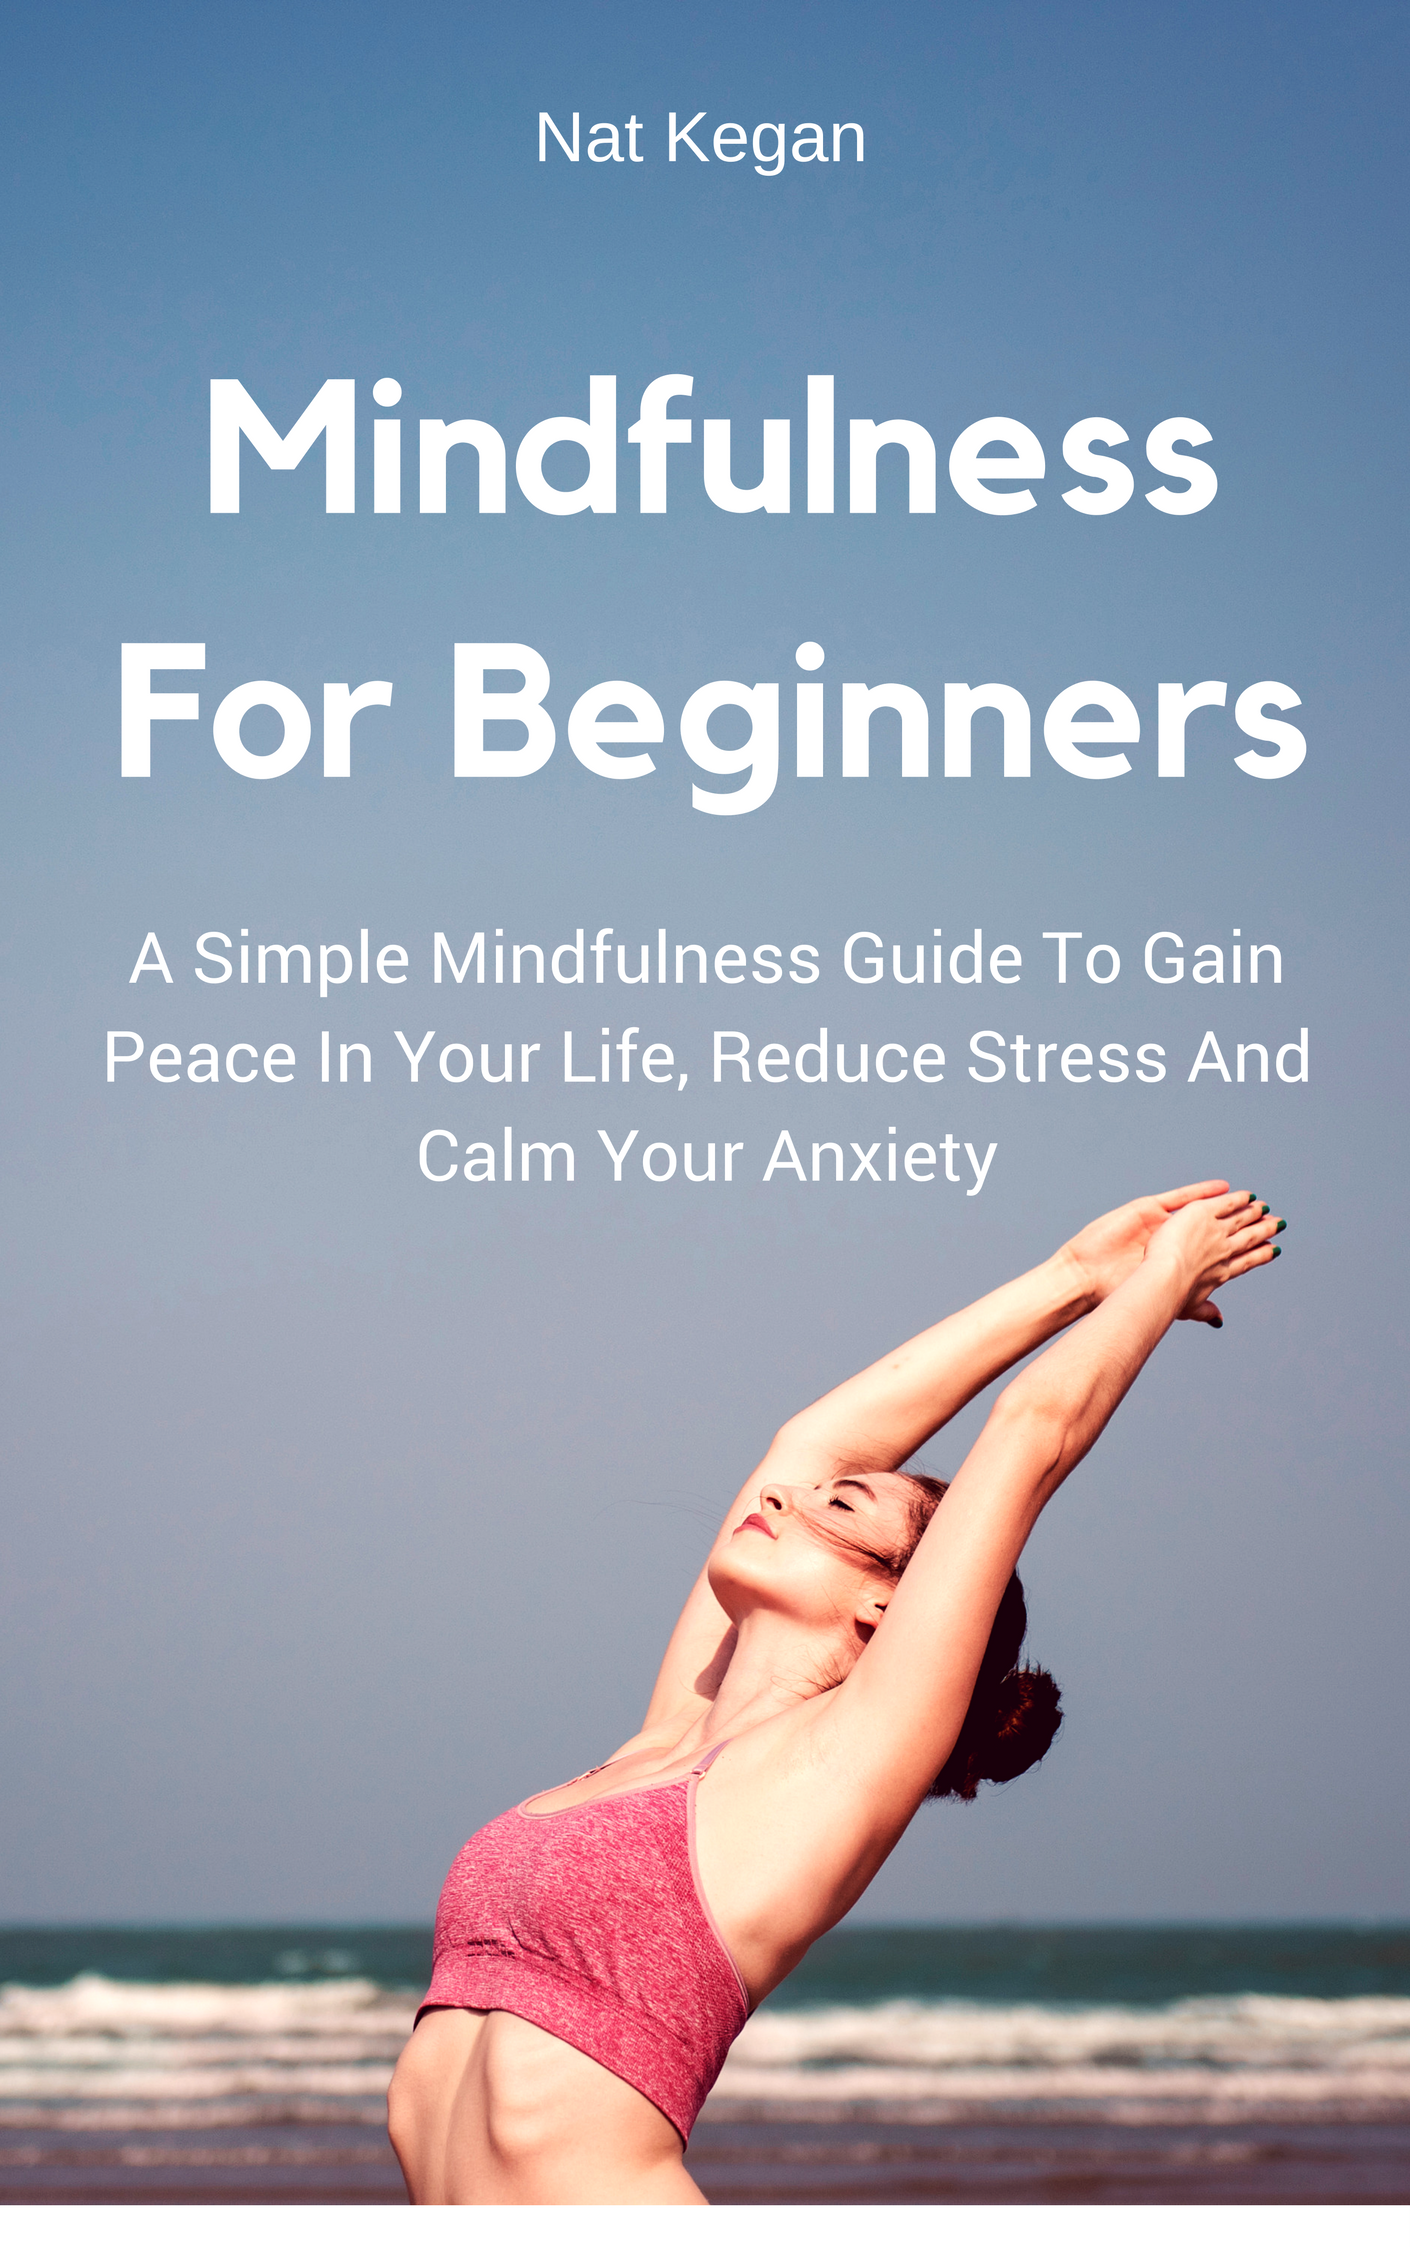 FREE: Mindfulness For Beginners: A Simple Mindfulness Guide To Gain Peace In Your Life, Reduce Stress And Calm Your Anxiety by Nat Keagan by Nat Keagan